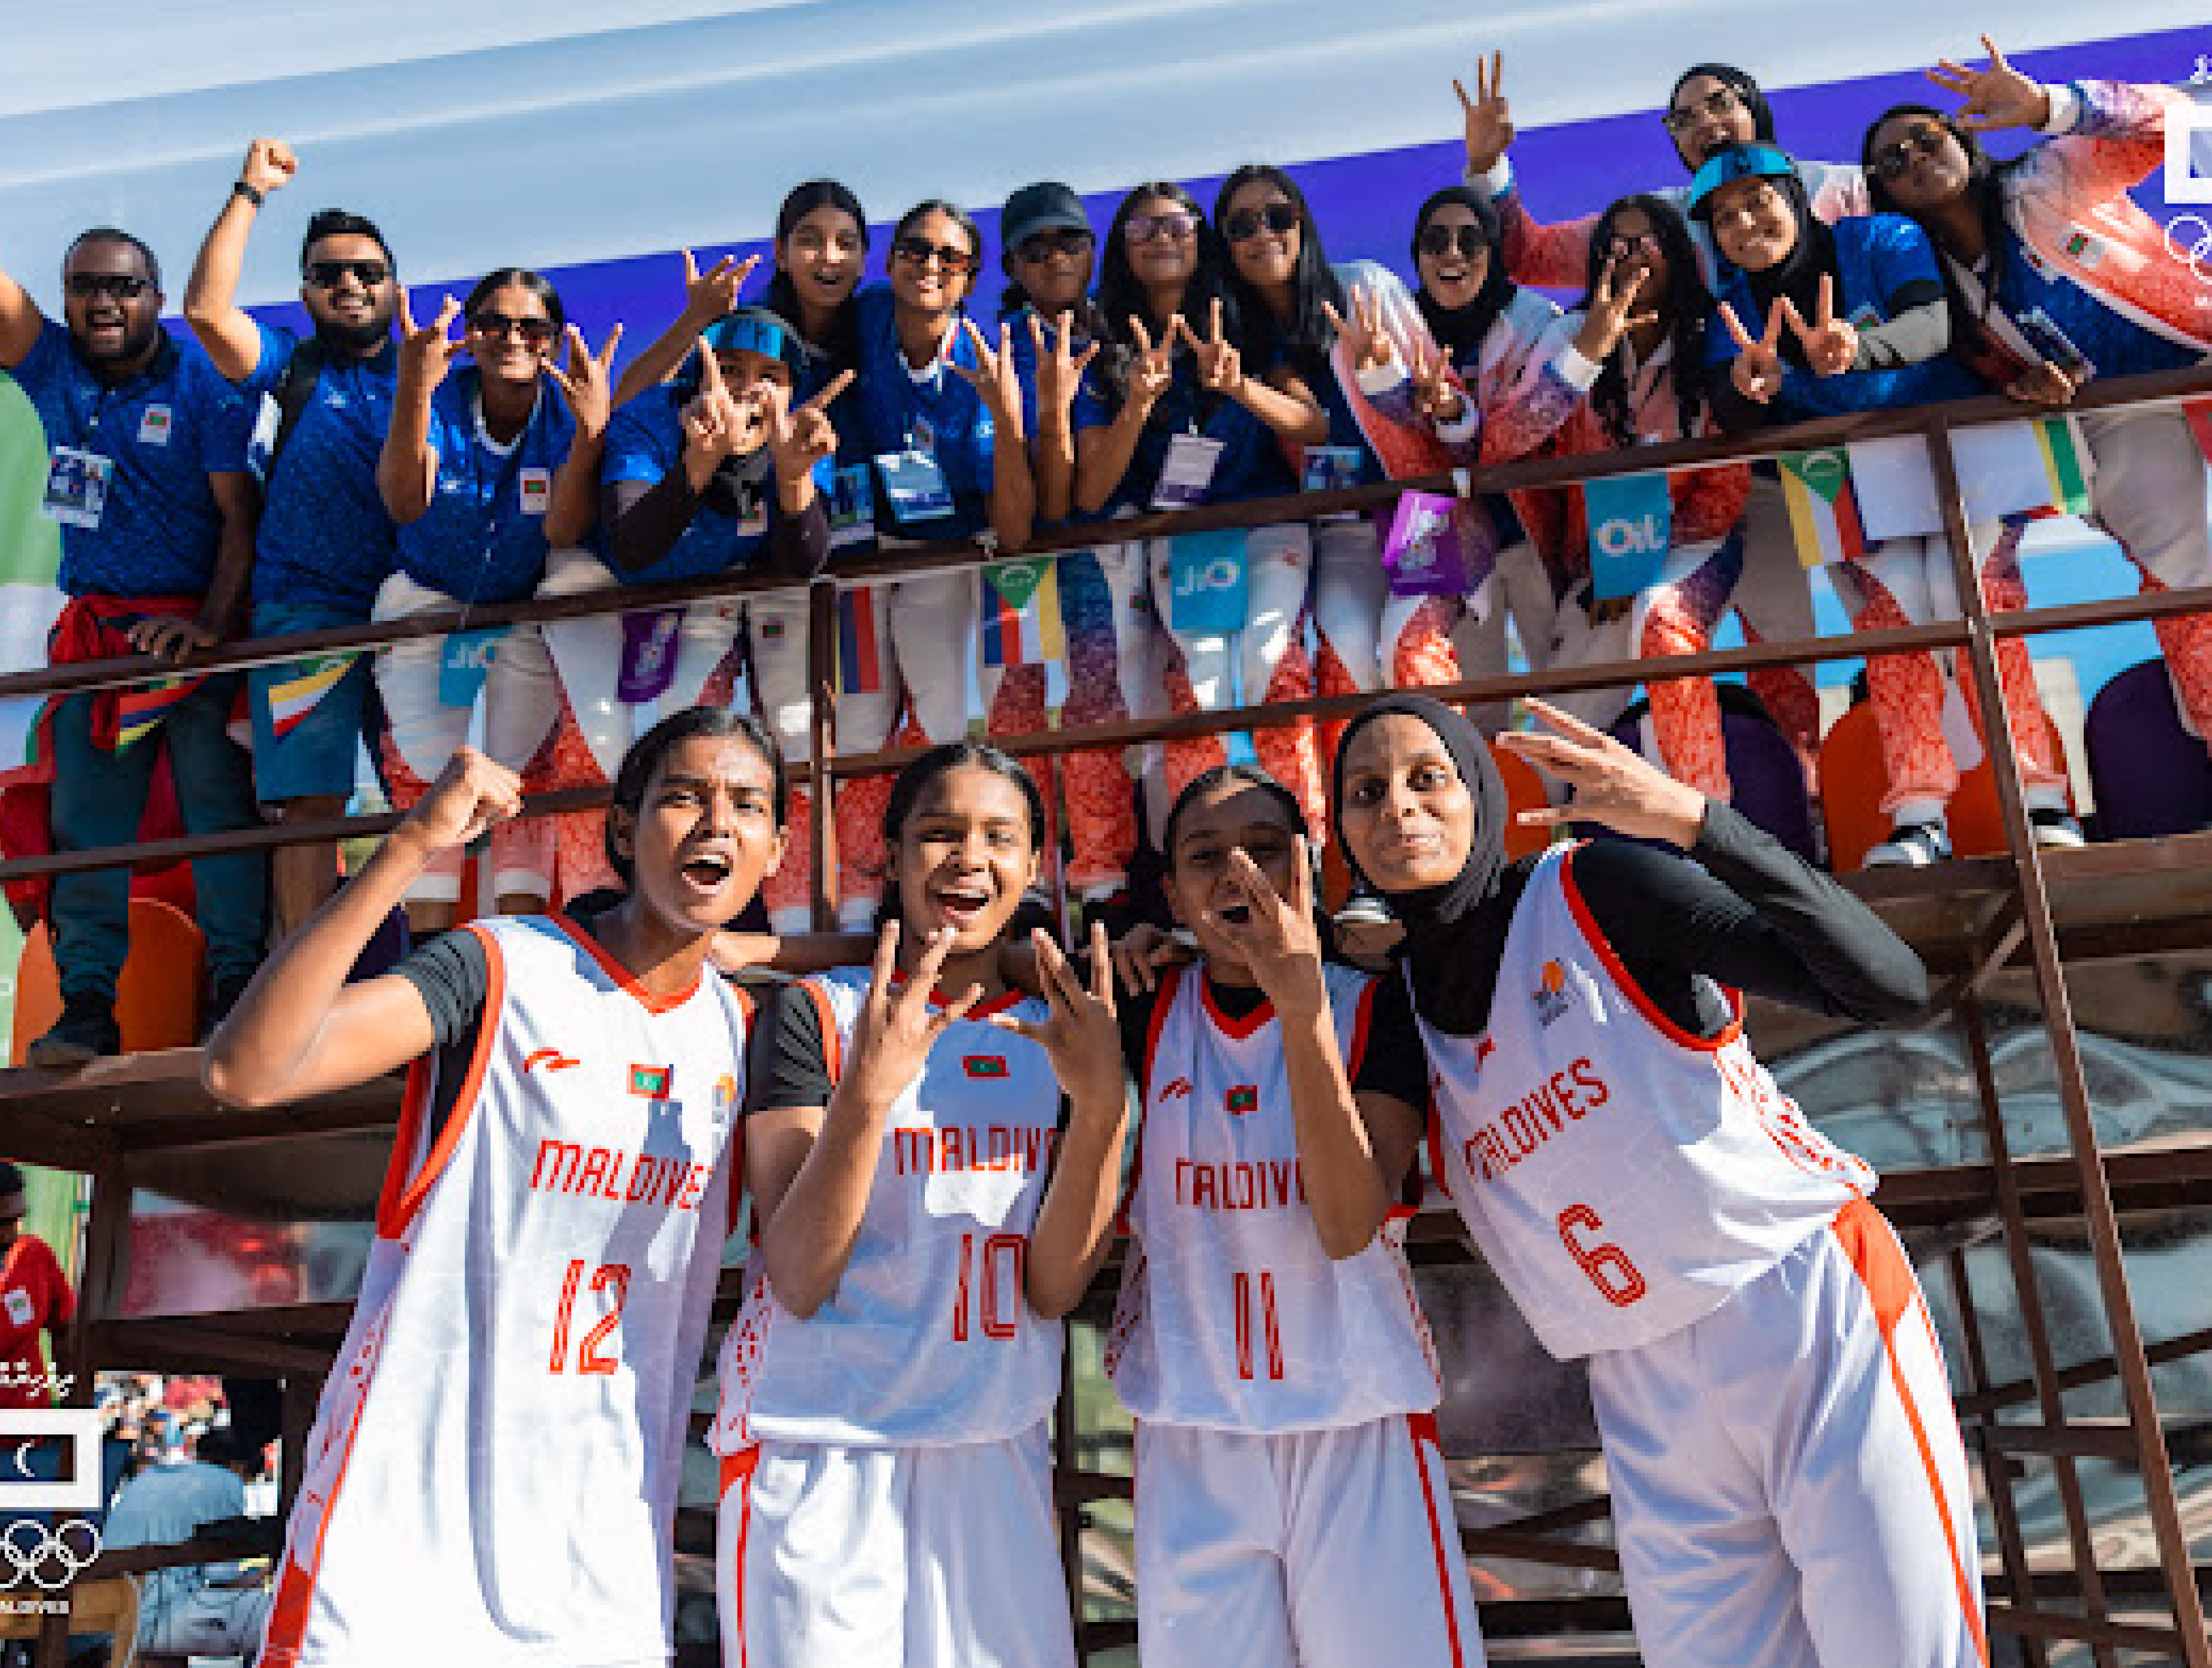 Ifa and her team [team name] celebrates their win at the 2023 Indian Ocean Island Games © Mohamed Shabin via Ifa